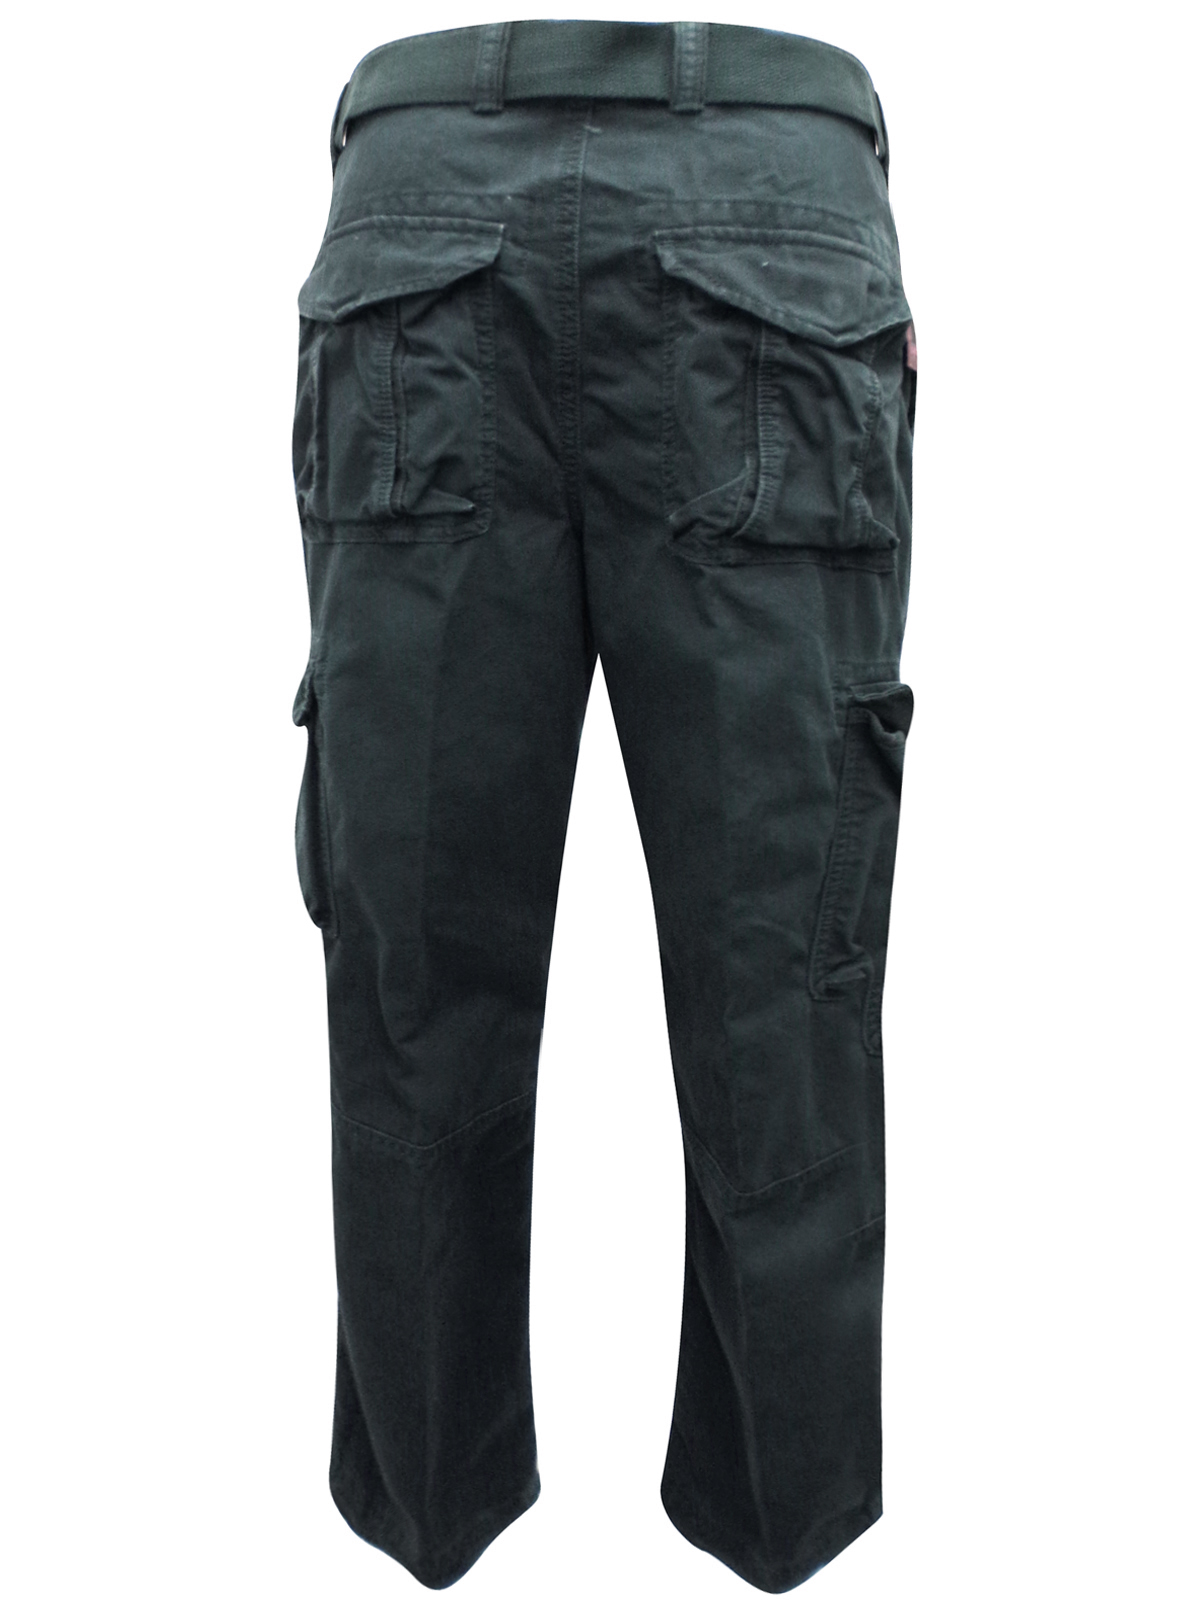 Marks and Spencer - - M&5 N0rth C0ast TEAL Pure Cotton Cargo Trousers ...